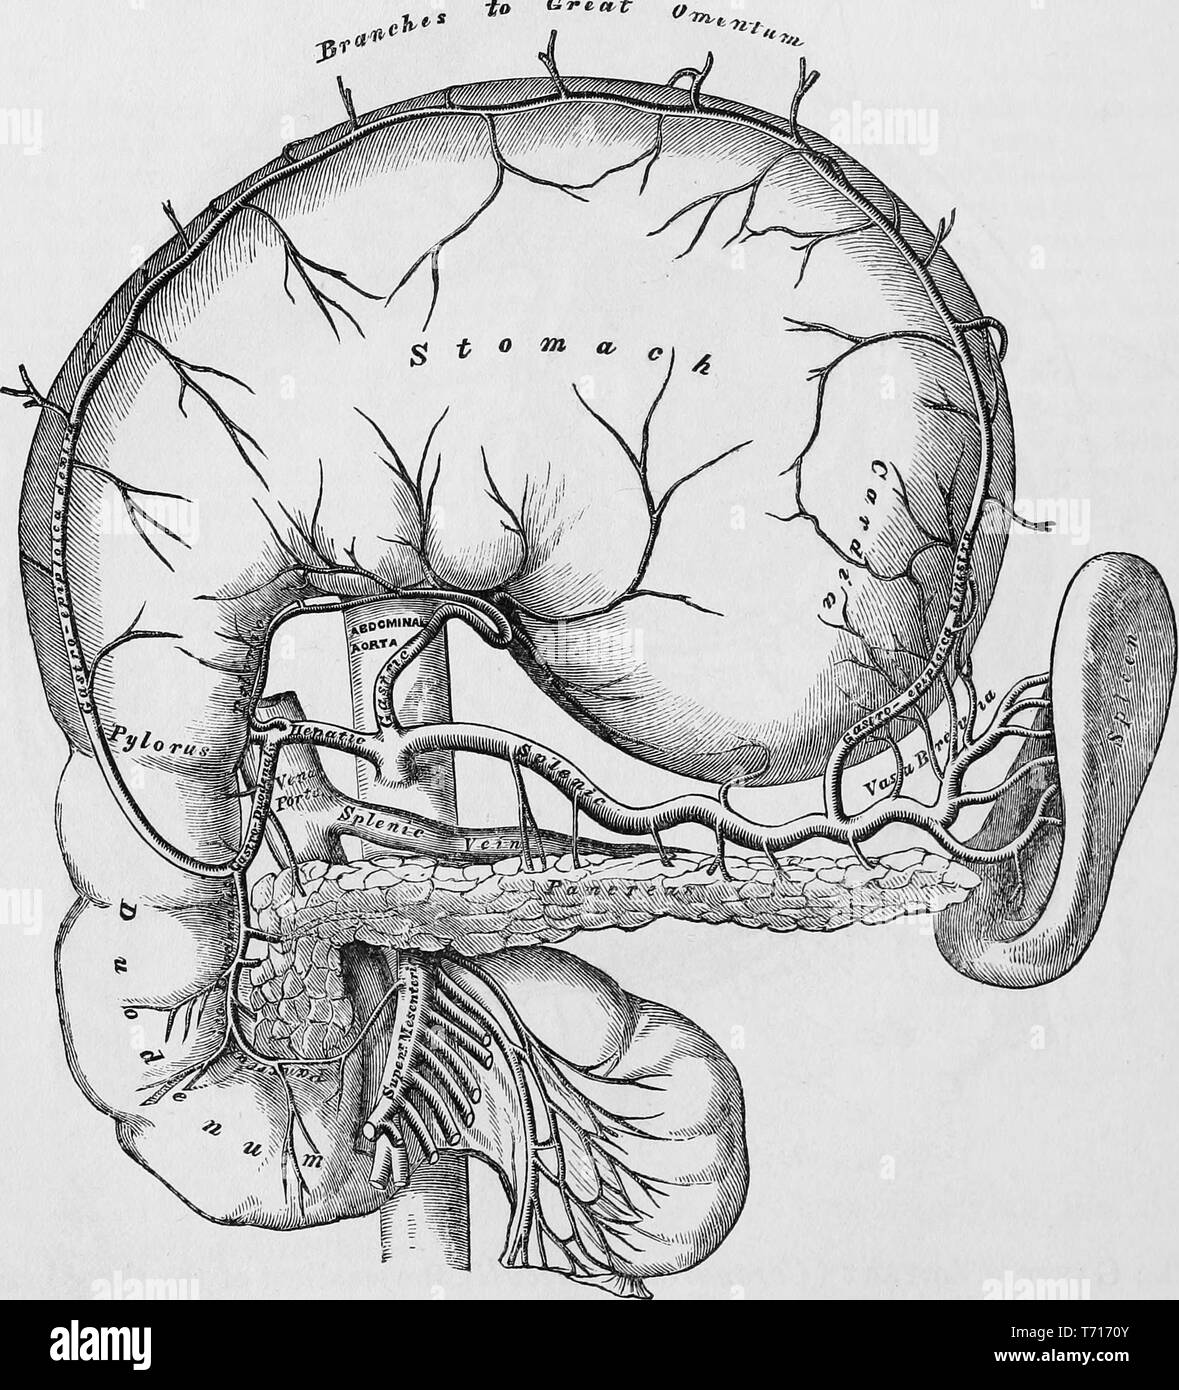 Anatomy illustration of the human stomach, from the book 'Anatomy, descriptive and surgical' by Henry Gray, Henry Vandyke Carter, and John Guise Westmacott, 1860. Courtesy Internet Archive. () Stock Photo